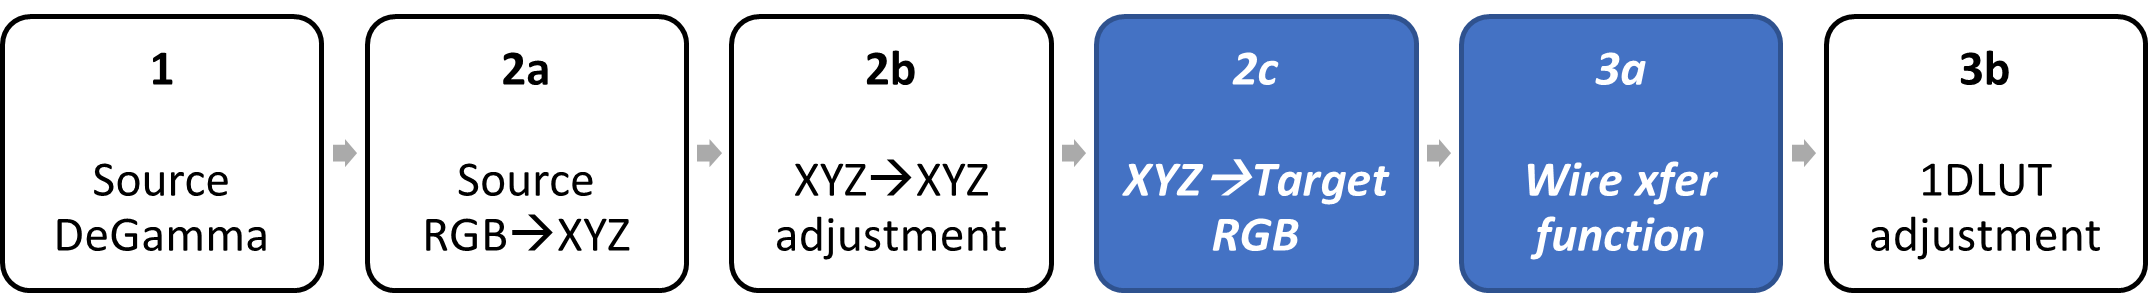 block diagram identifying xyz to target rgb and wire transfer function stages